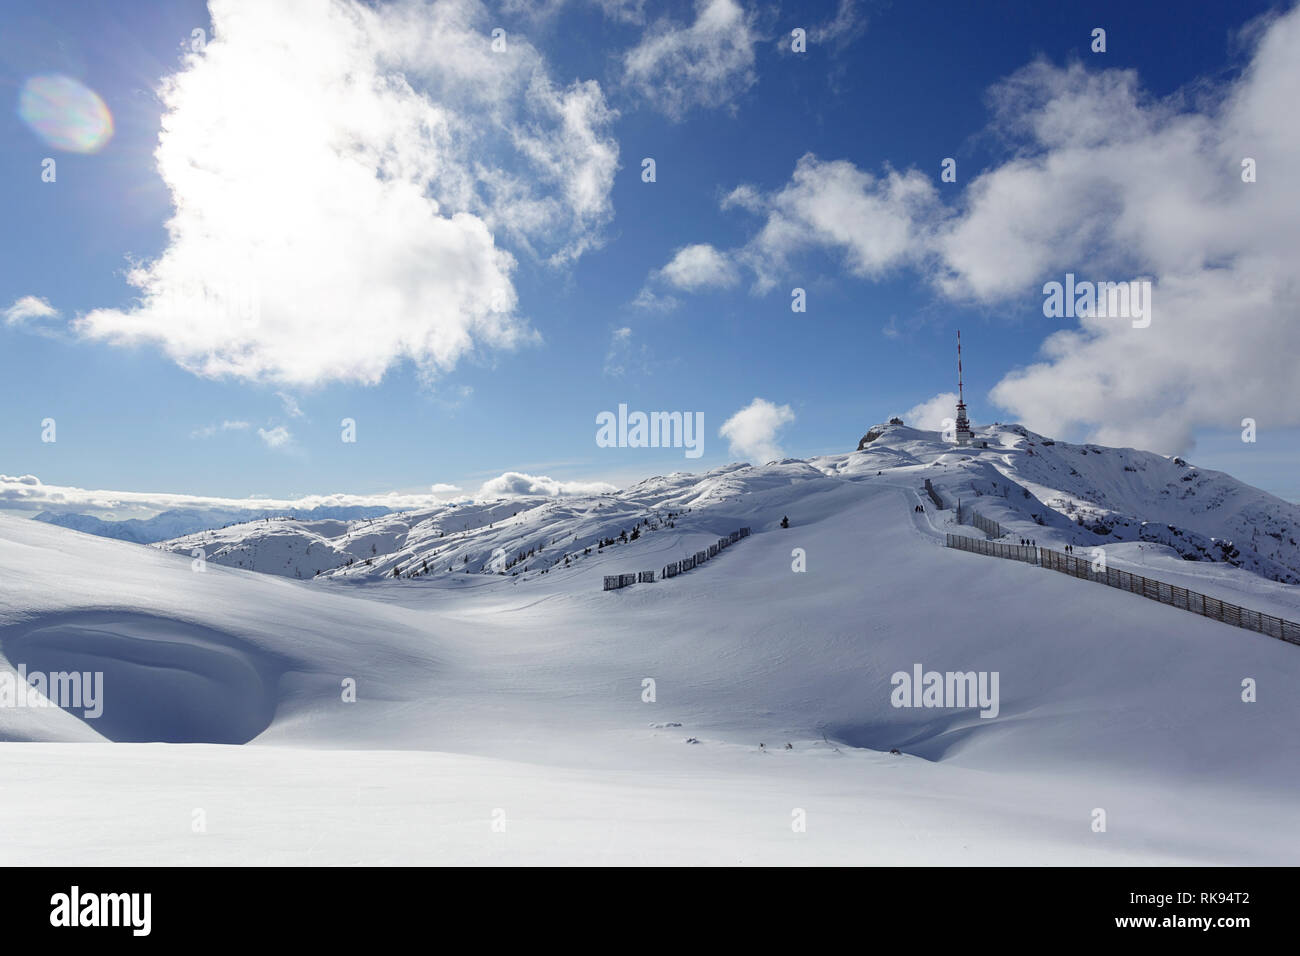 Carinthia Austria Snow High Resolution Stock Photography and Images - Alamy